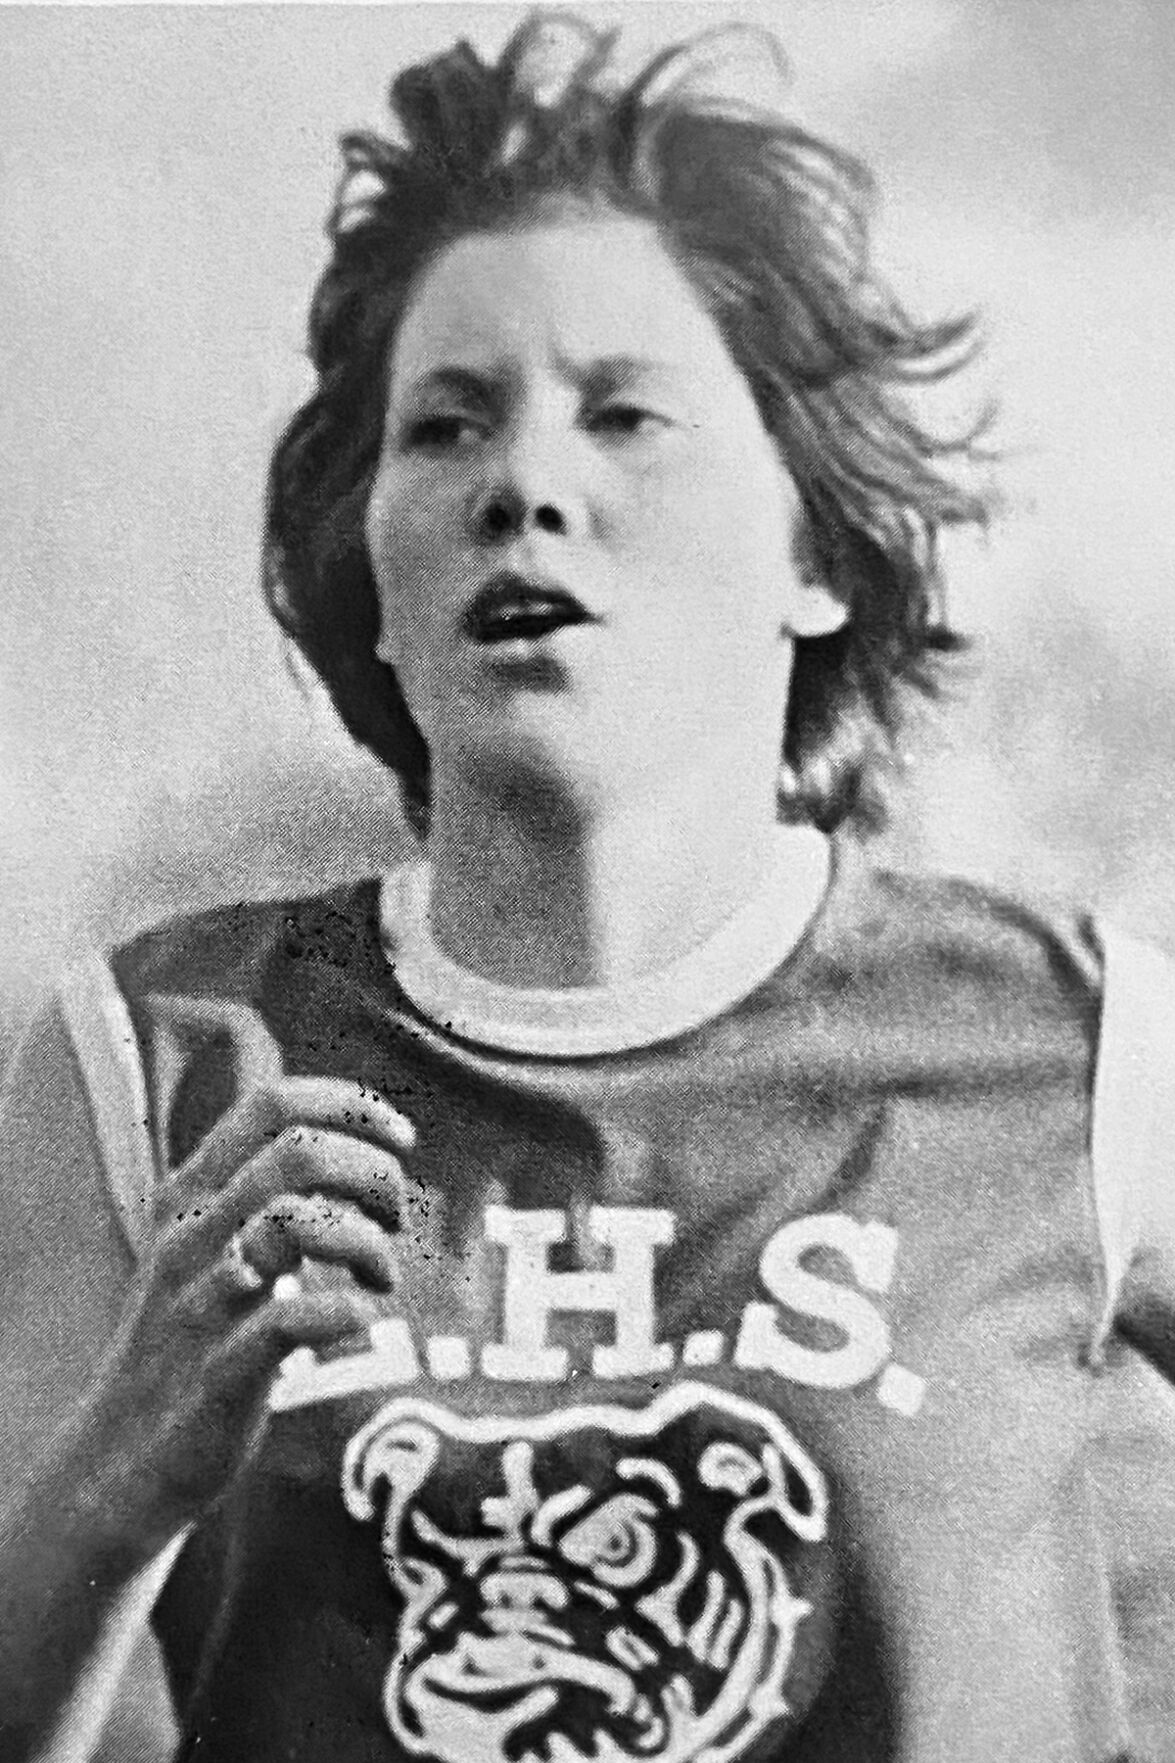 The magnificent seven: Ellensburg High School Hall of Fame announces inductees